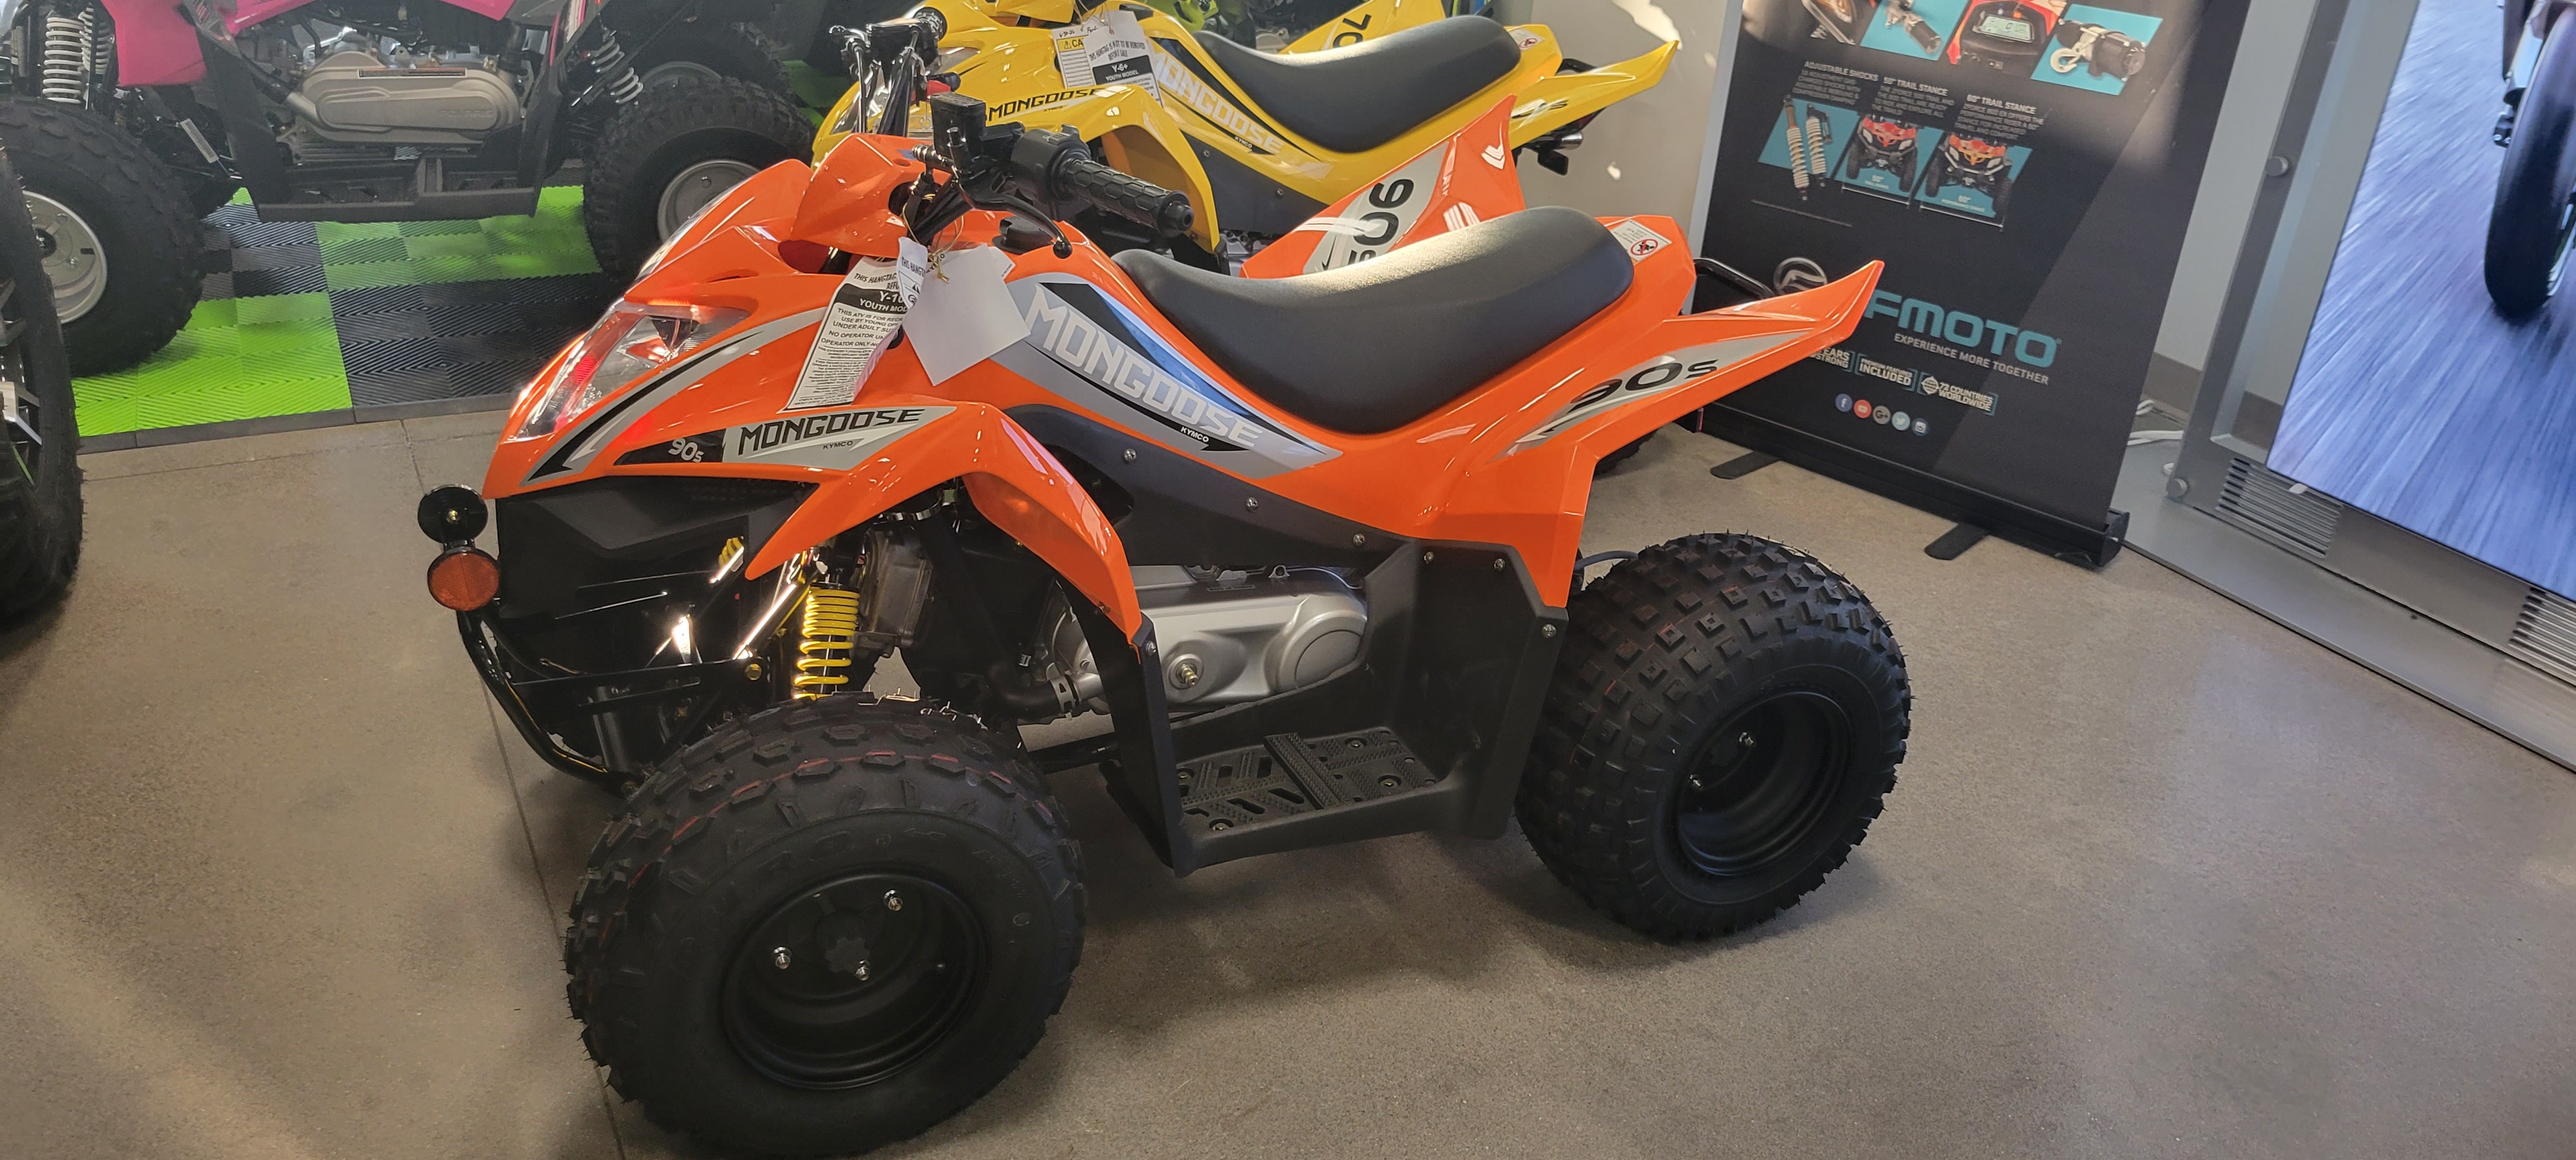 2022 KYMCO Mongoose 90S at Brenny's Motorcycle Clinic, Bettendorf, IA 52722